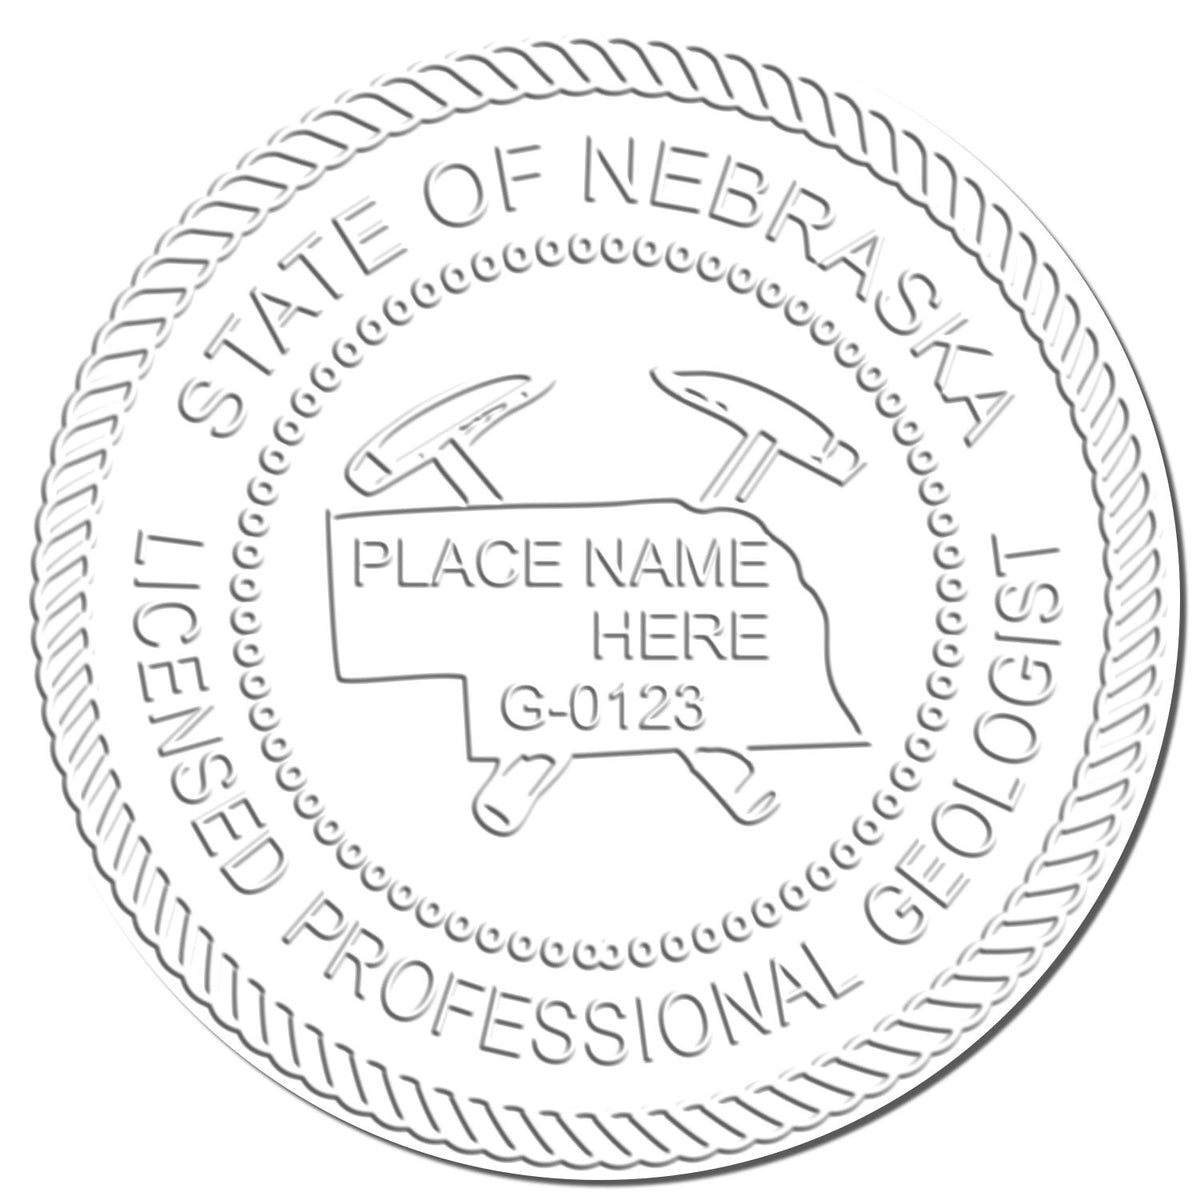 A photograph of the State of Nebraska Extended Long Reach Geologist Seal stamp impression reveals a vivid, professional image of the on paper.